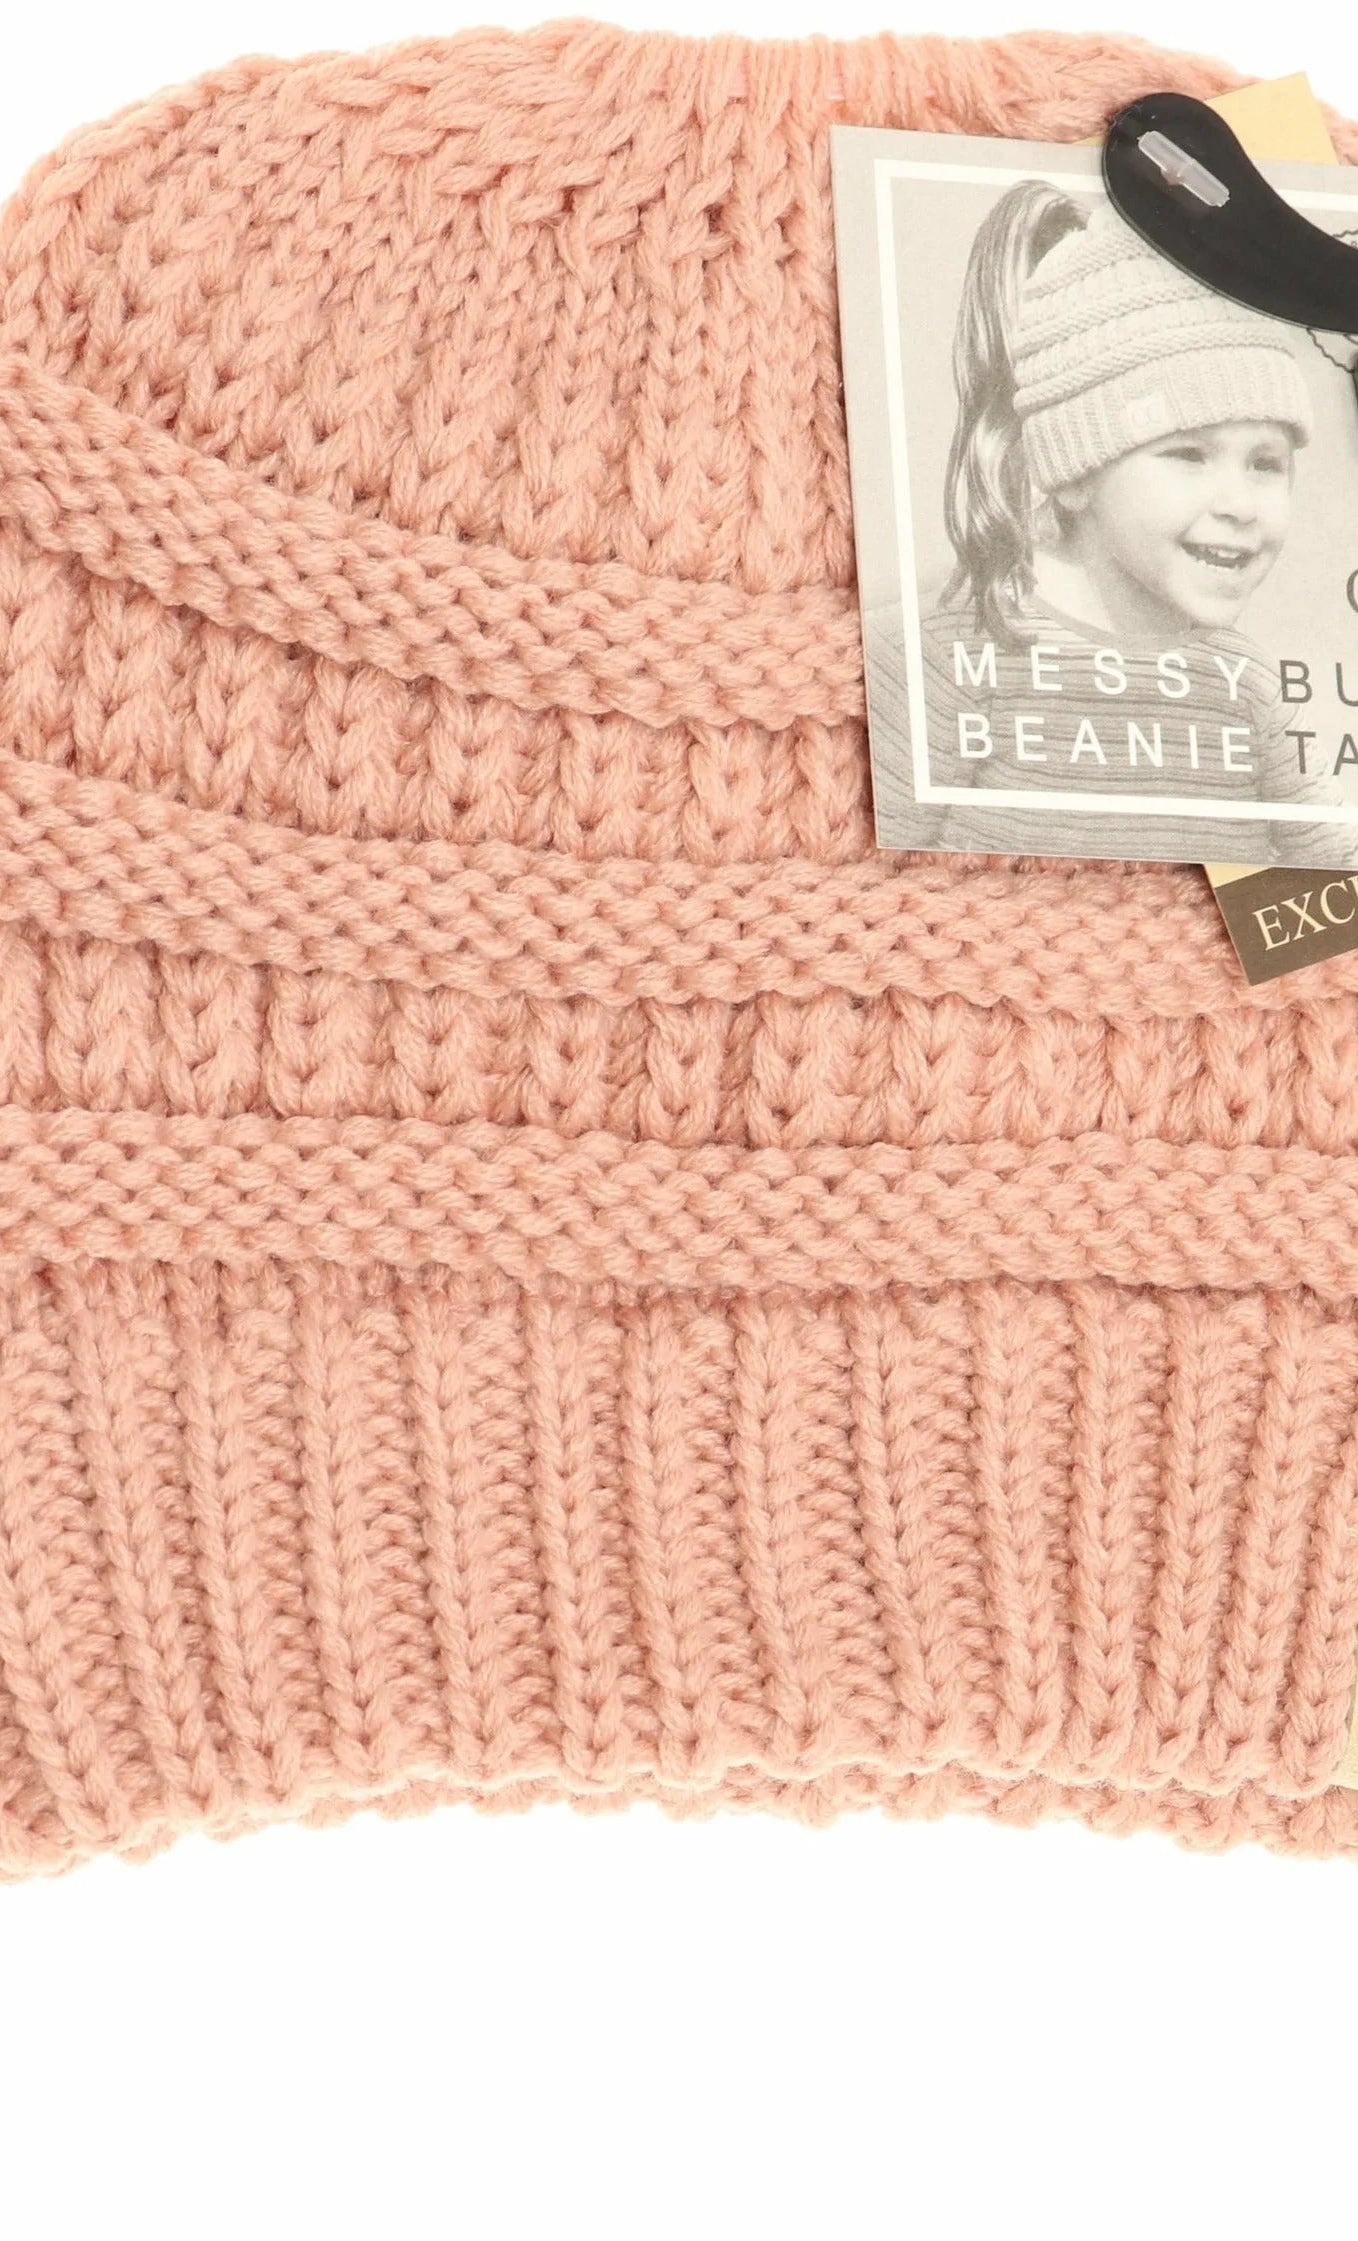 Kids Solid Classic CC Beanie Tail Indie Pink Indie Pink  beanie CC Brand Beanies- Tilden Co.